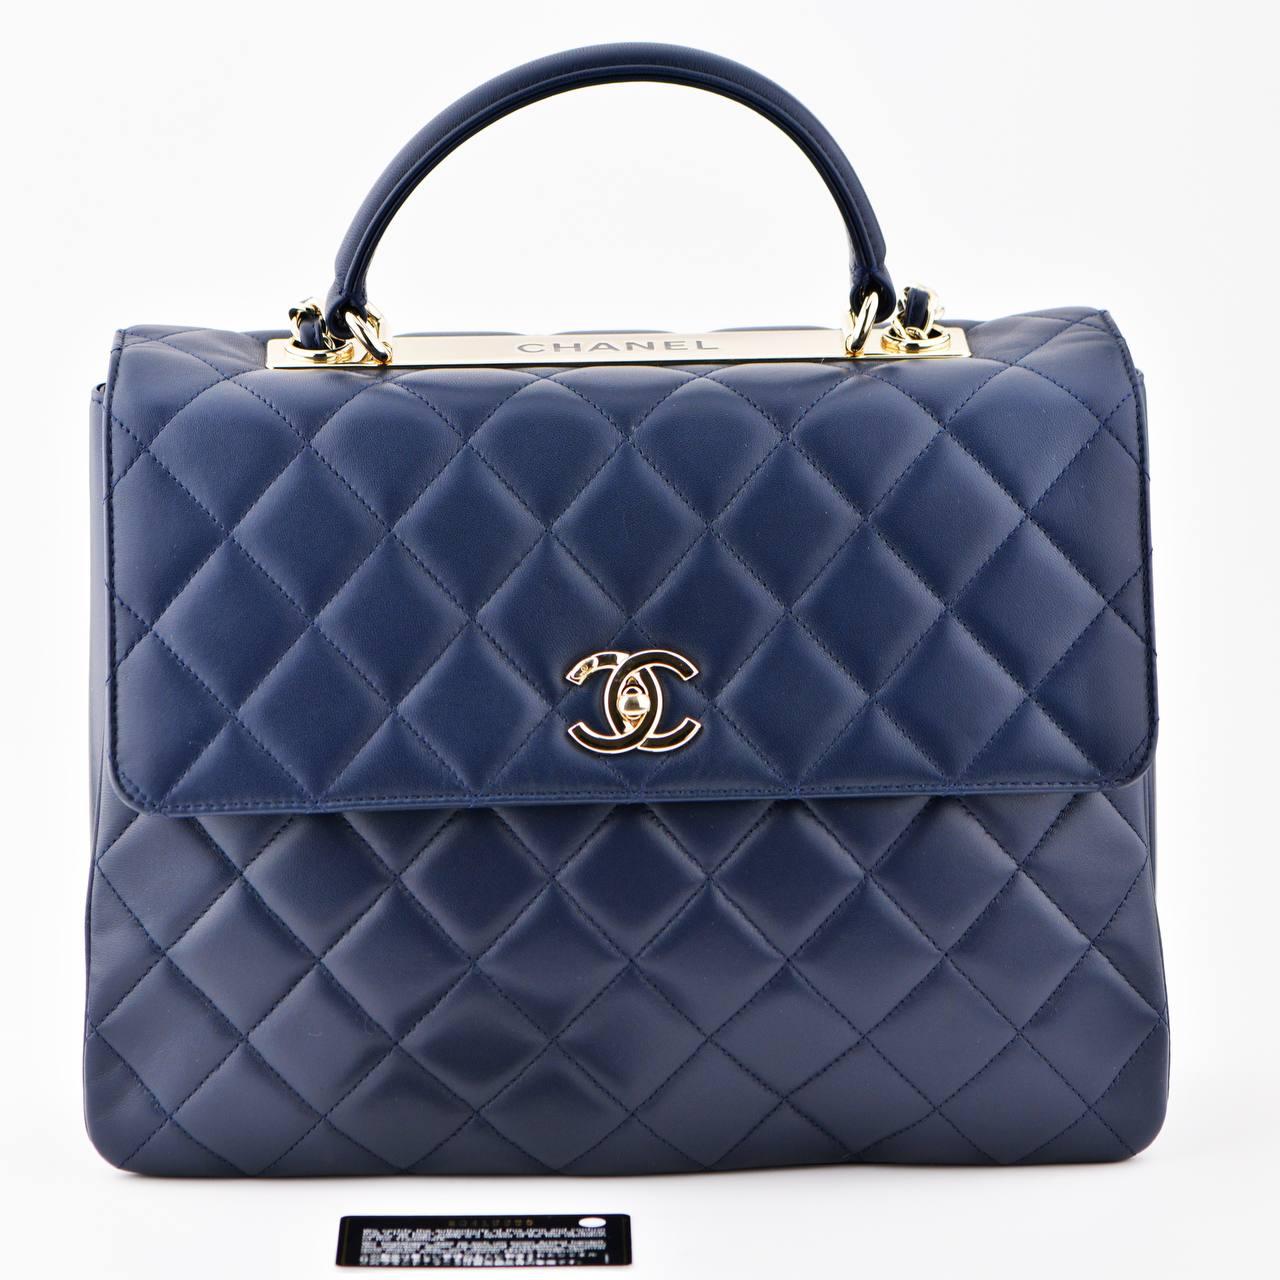 SKU 	AT-1613
Brand	Chanel
Model	Trendy CC Top Handle
Serial No  20******
__________________________________________________________________________________
Color	Navy
Date	Approx. 2014-2015
Metal	Gold
Material	Lambskin Leather
Measurements	Approx.